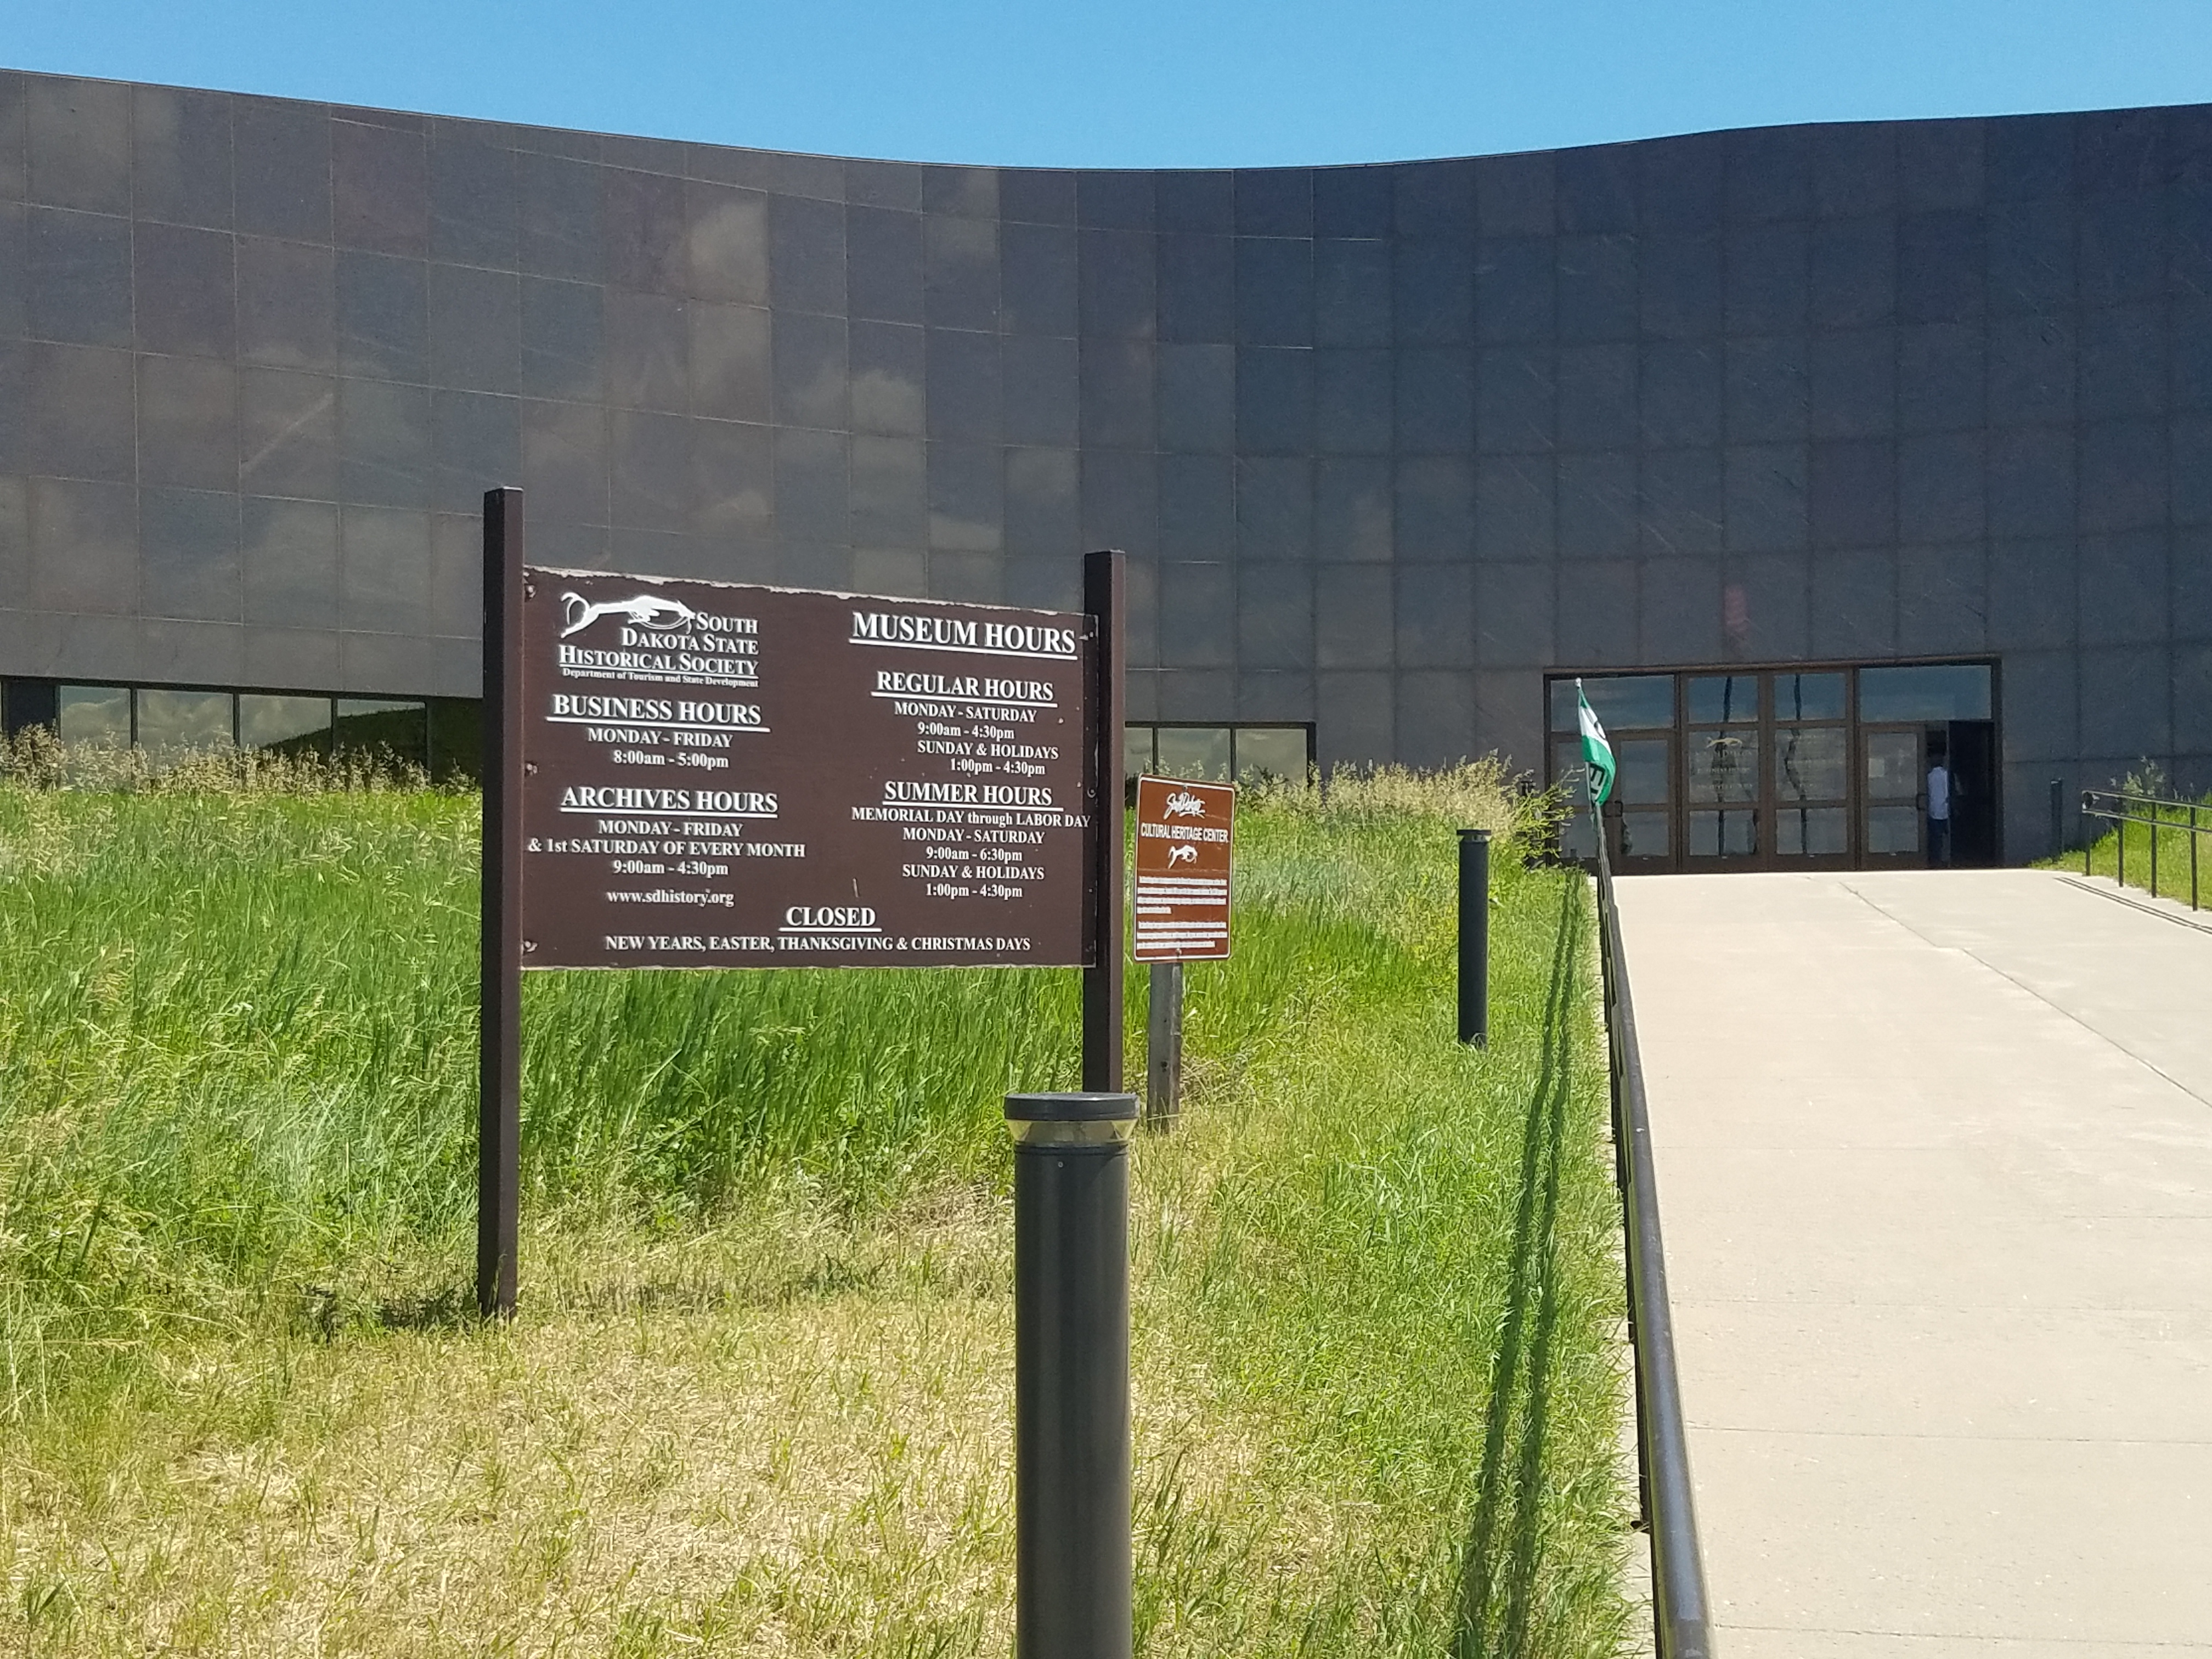 Passage Of House Bill 1047 Brings Excitement For Cultural Heritage Center Changes